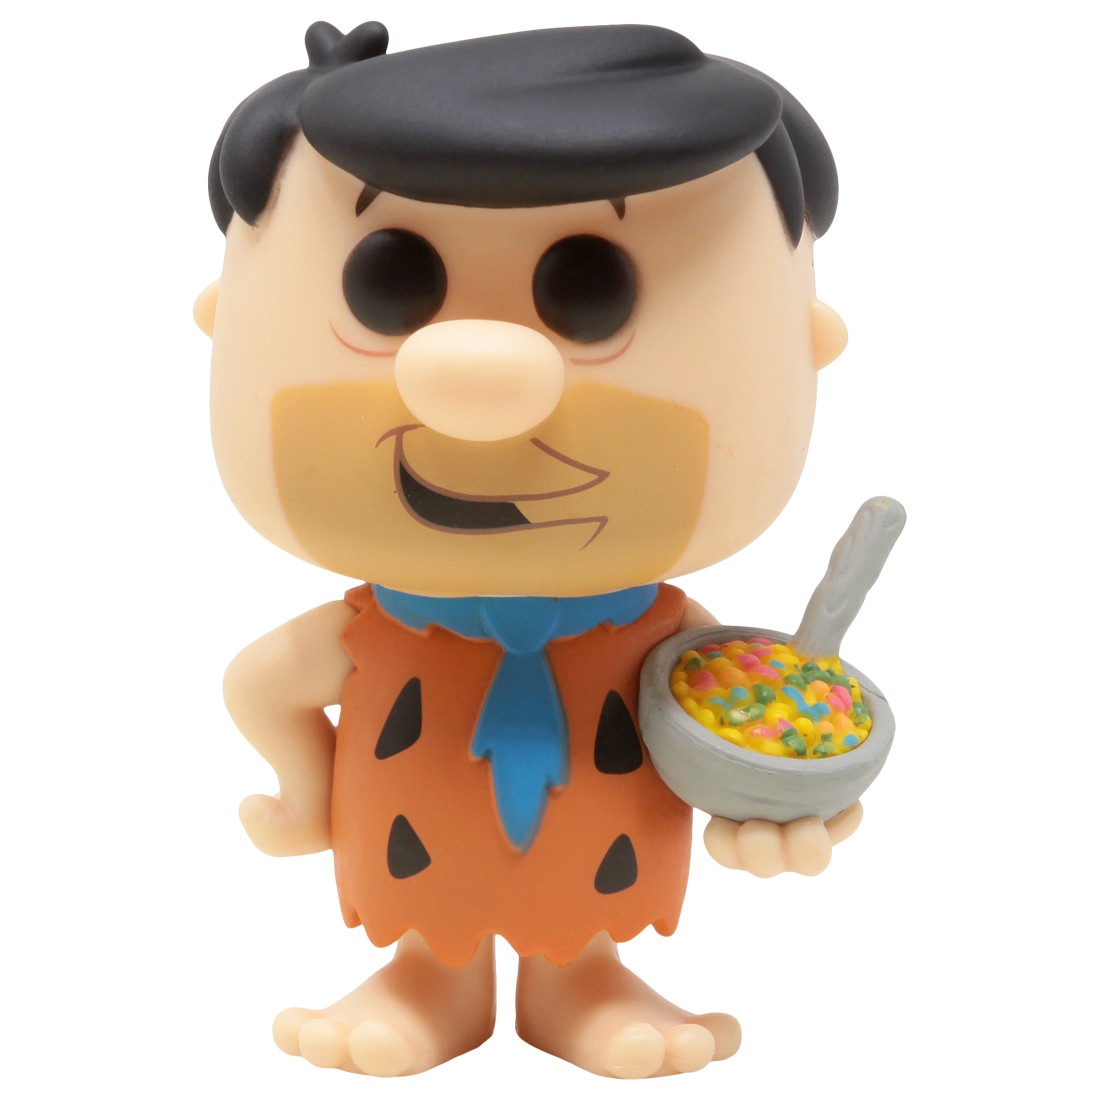 Funko POP Ad Icons The Flintstones And Fruity Pebbles - Fred Flintstone With Fruity Pebbles (orange)